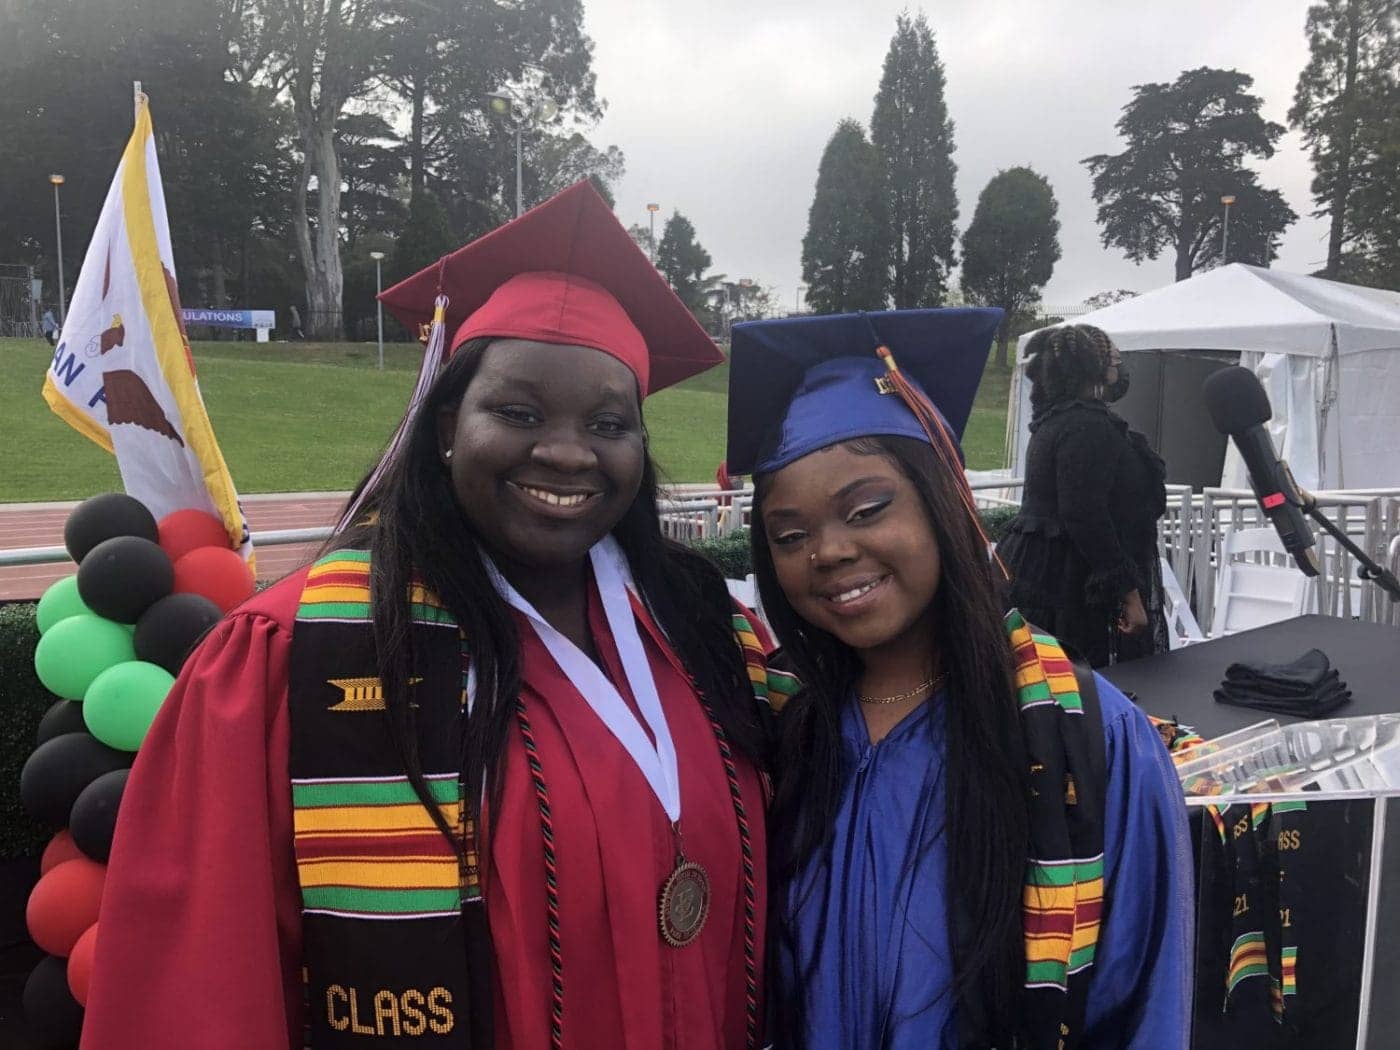 Shavonne-Hines-Foster-and-Serenity-Payne-Second-Annual-Black-Graduation-at-Kezar-Pavilion-Stadium-by-Daphne-Young-060421-1400x1050, Black graduates celebrate big at 2021 Rites of Passage ceremony!, Culture Currents Eye on Education 